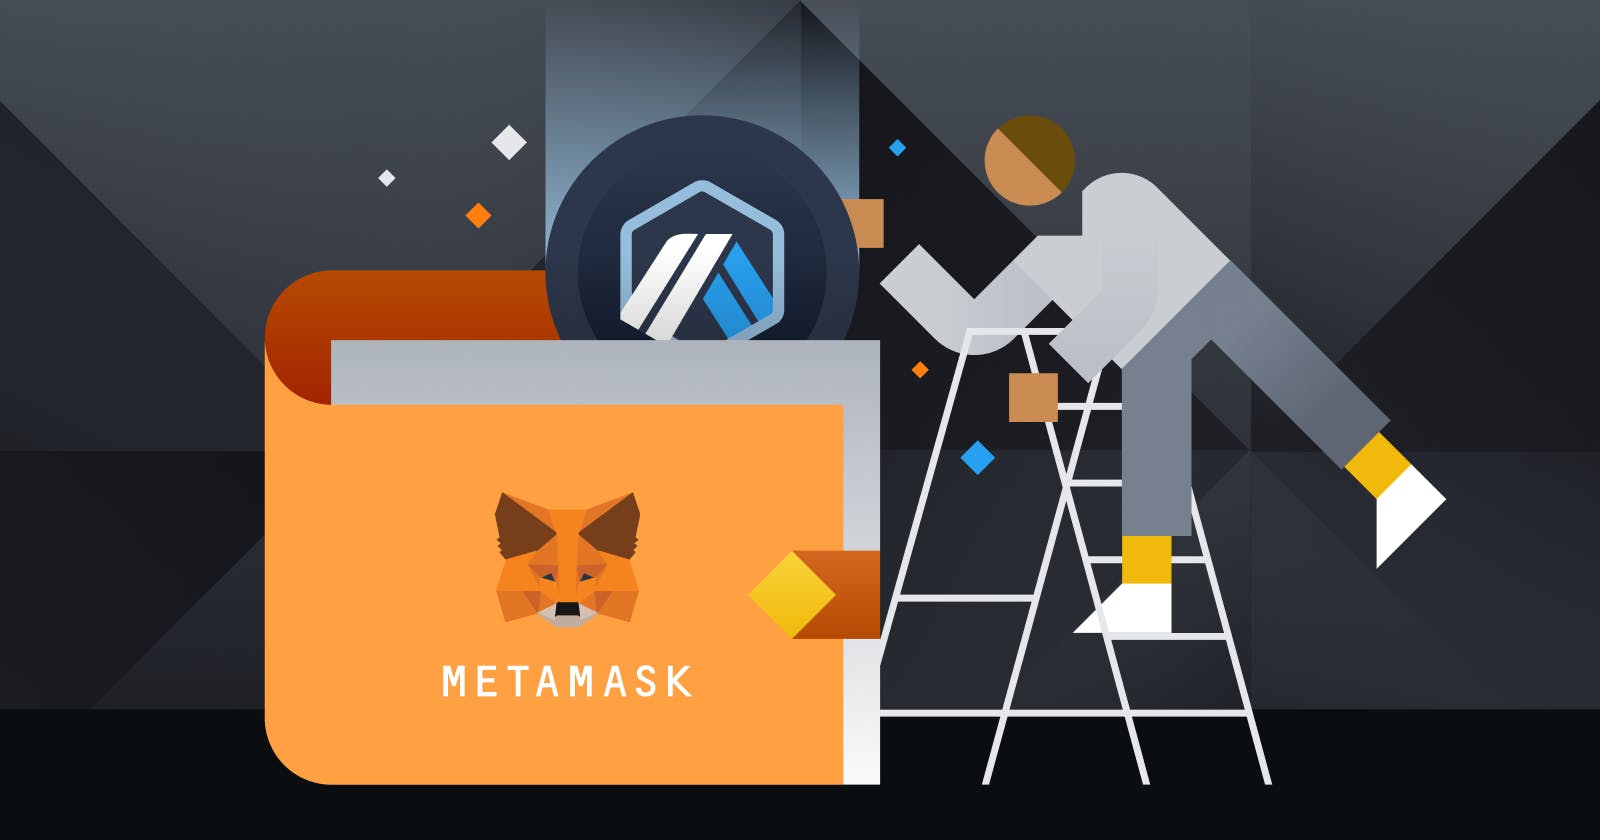 How to Add Arbitrum to Metamask?